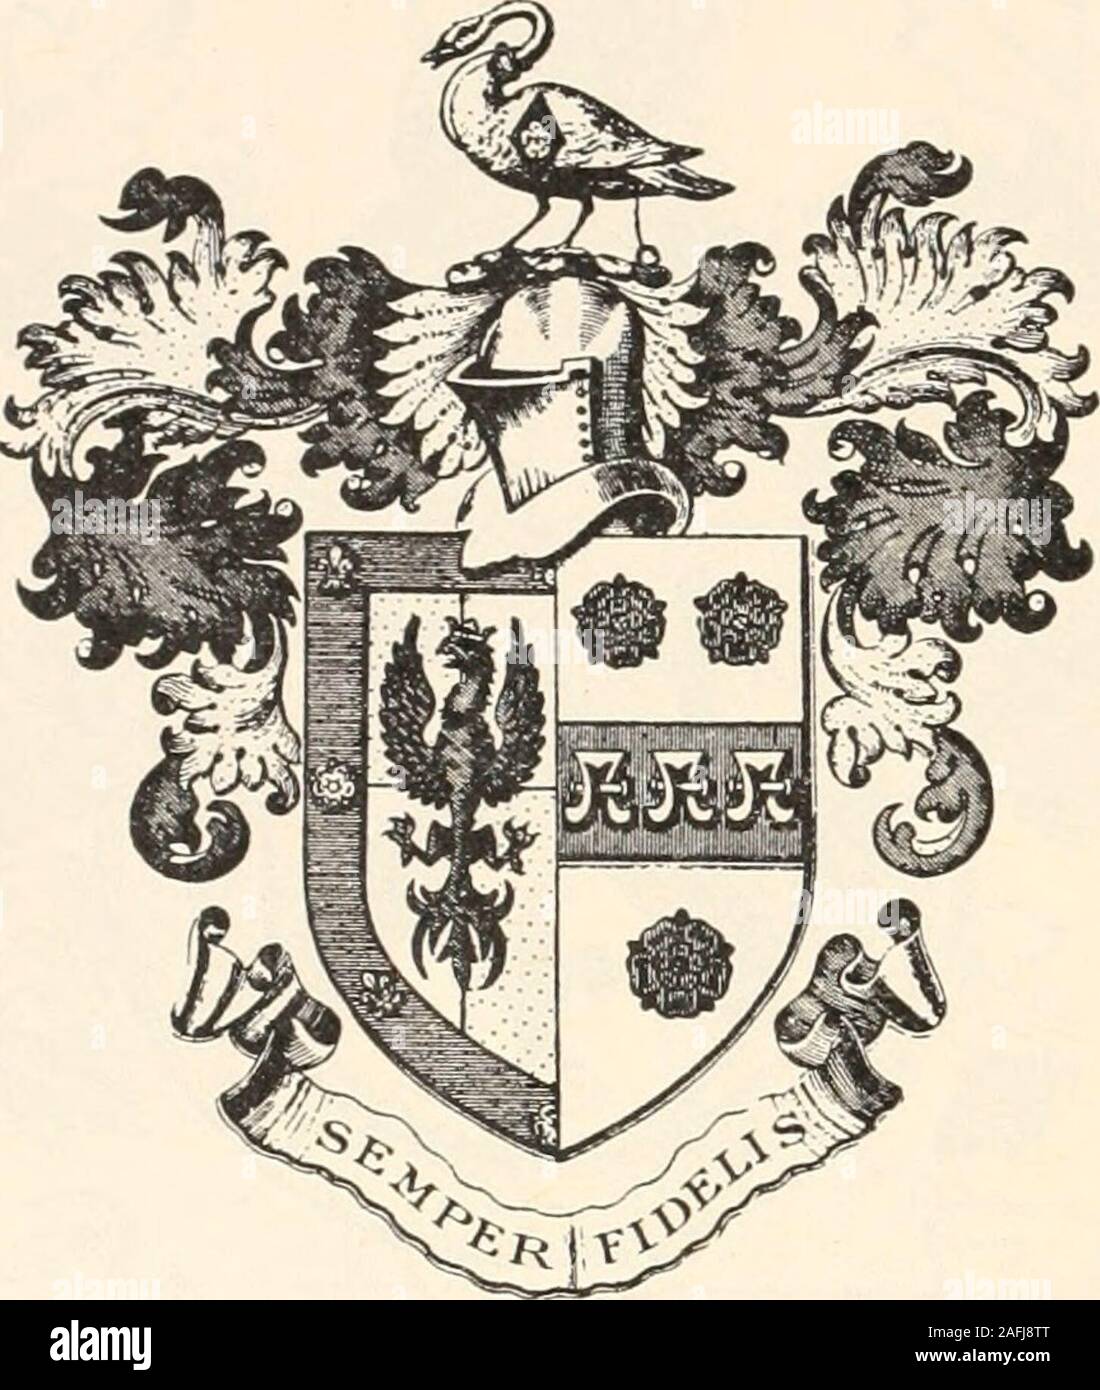 . Armorial families : a directory of gentlemen of coat-armour. ntle-man, b. 1920; and Katherine Downer. Res.—Carhayes,Adelaide ; and Eurilla, Mount Lofty, South Australia.C/«d—Adelaide. BOOKER of Nottingham (H. Coll.). Quarterly or andargent, an eagle displayed vert, ducally crowned of thefirst, all within a bjrdure azure charged with four fleurs-de-lys and as many roses alternately also of the firstMantling vert and or. Crest — On a wreath of thecolours, a swan proper, collared and lined or, and chargedwith a fusil azure, thereon a rose argent. MottO—Semperfidelis. Son of Frederic Richard Boo Stock Photo